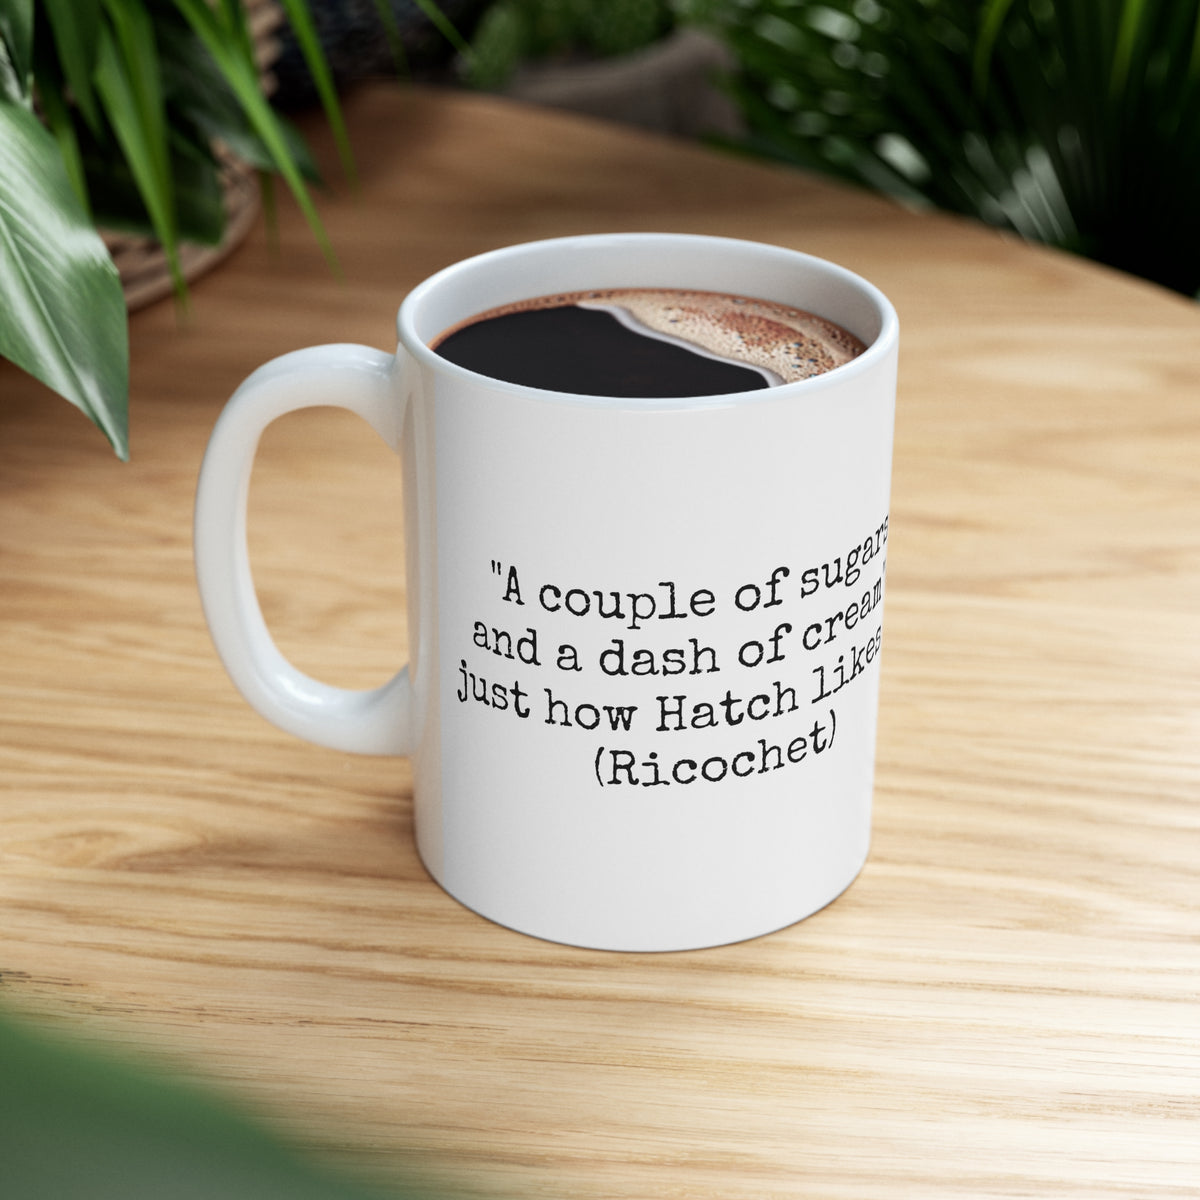 &quot;A couple sugars and a dash of cream&quot; Rachel hatch Coffee Mug